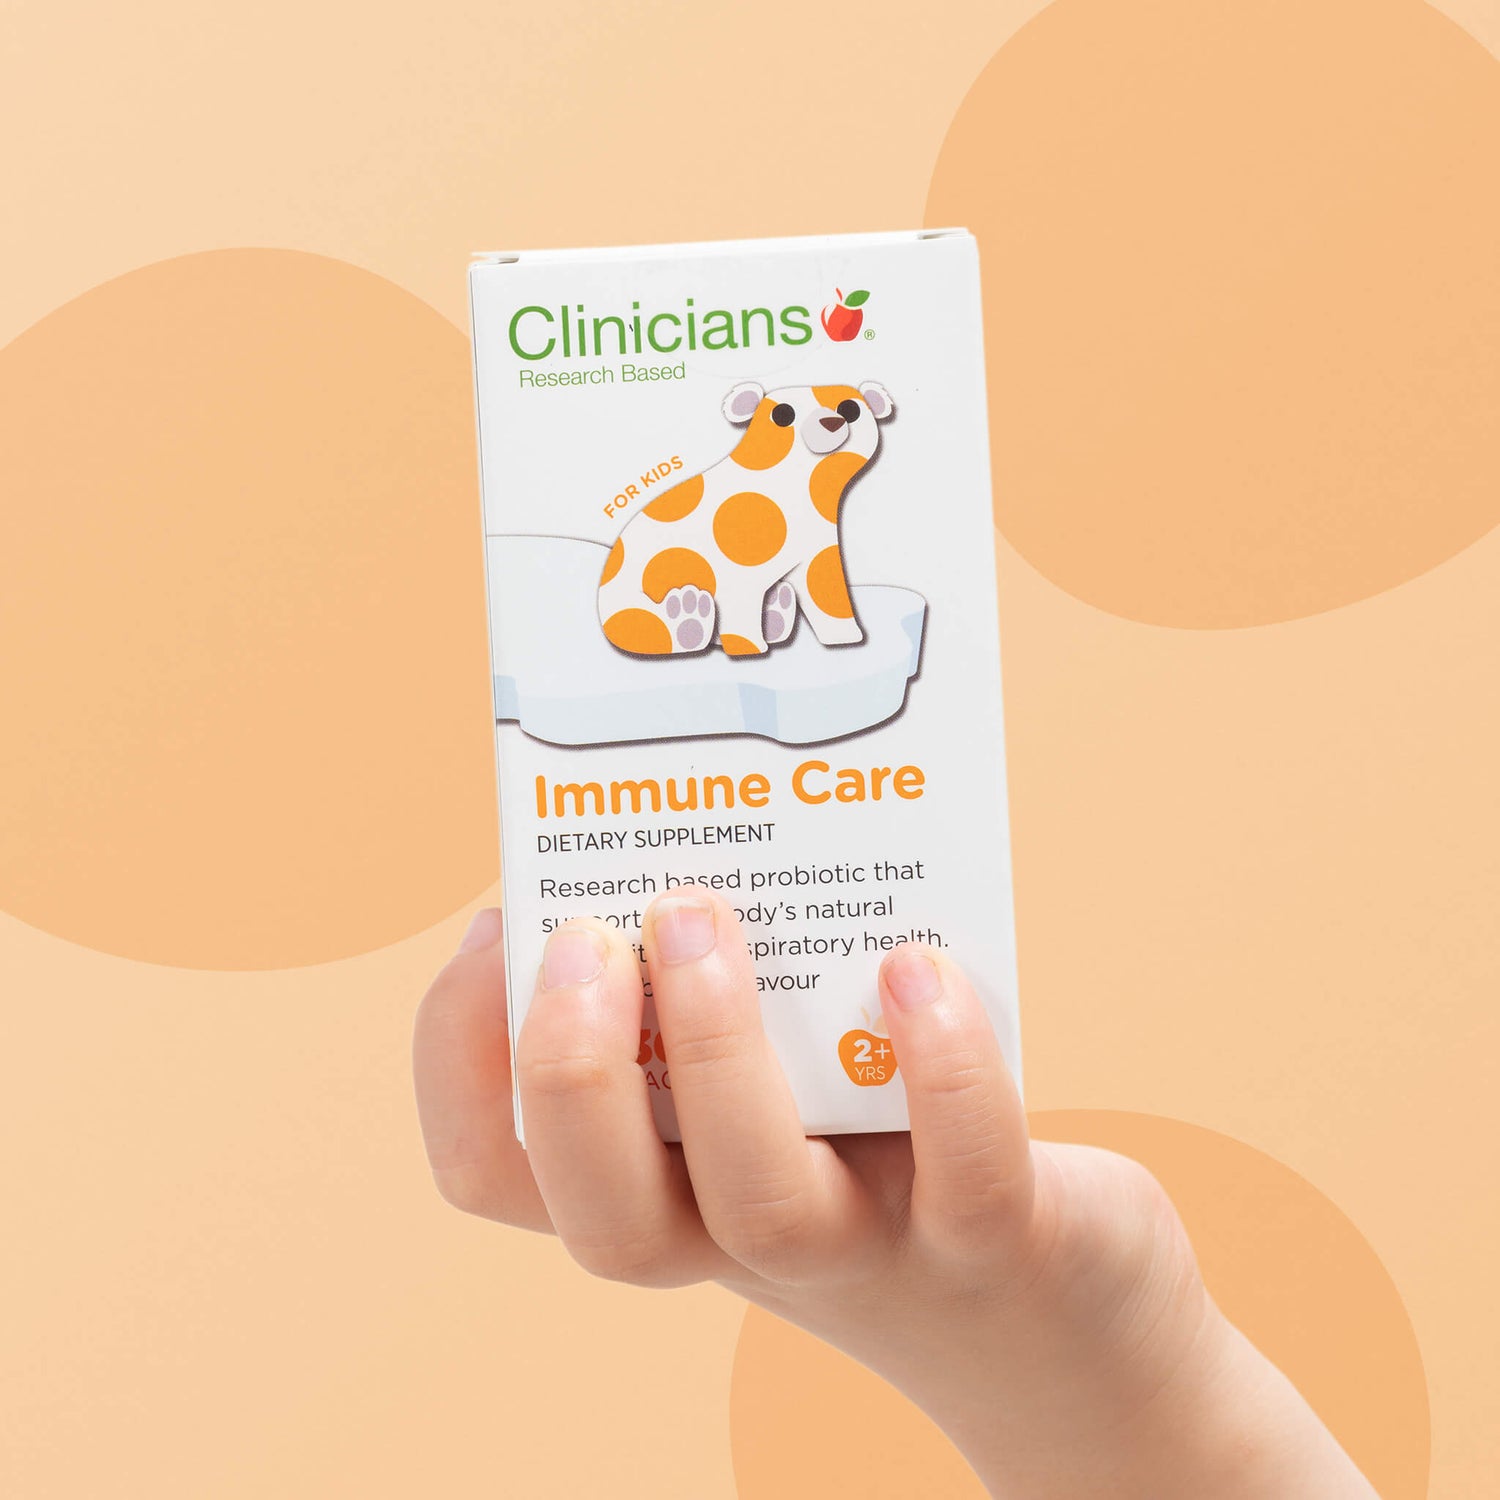 Child's hand holding a box of Clinicians Immune Care